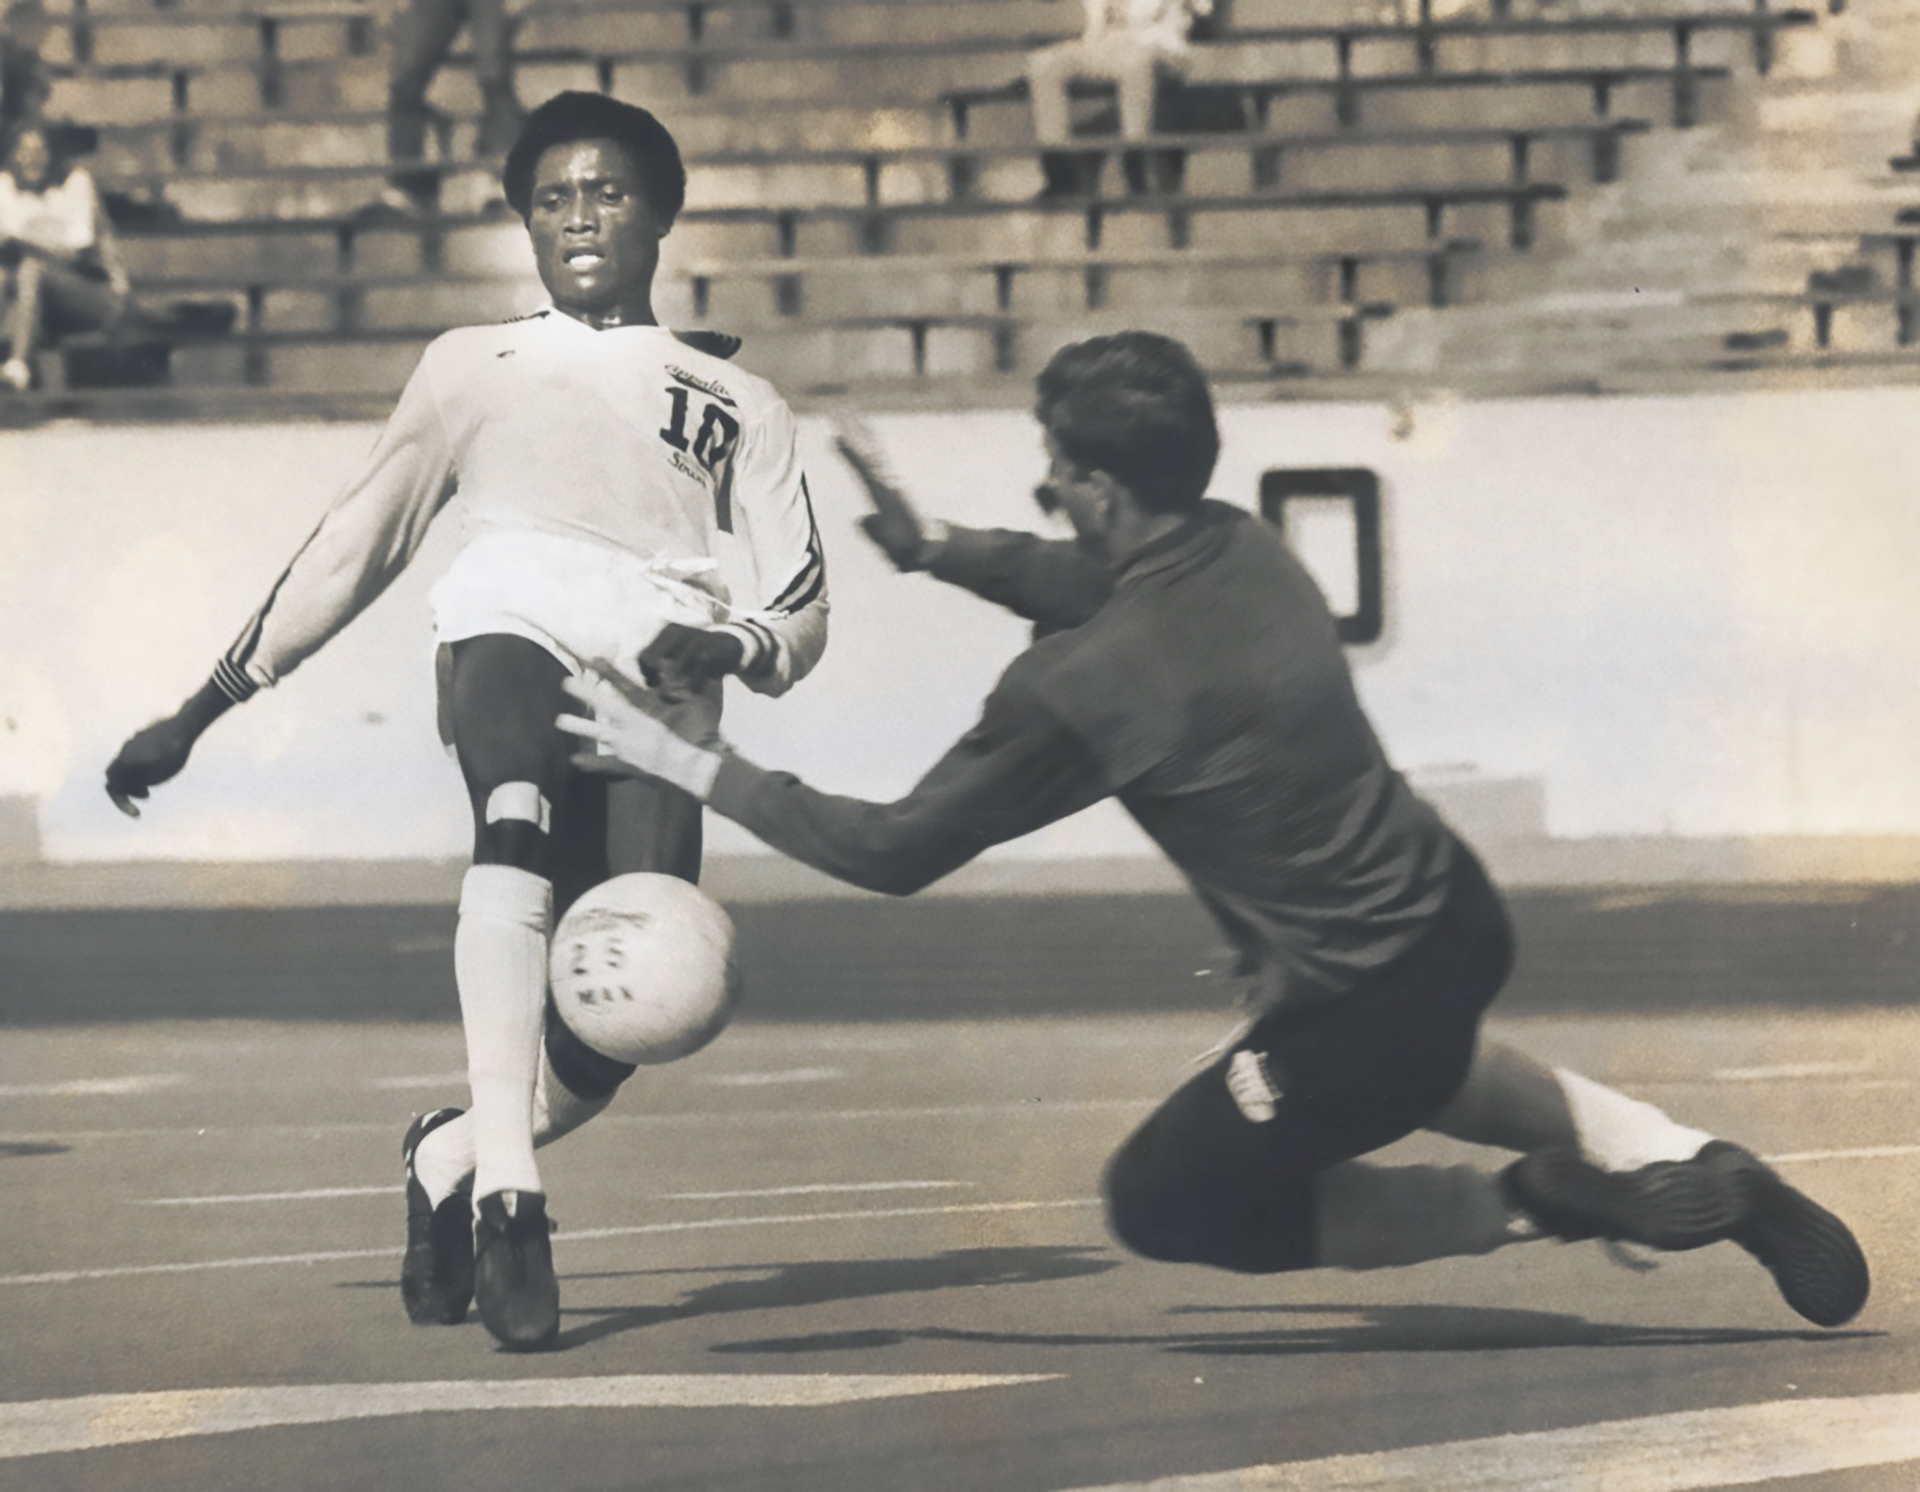 Thompson Usiyan, a member of the Nigerian Olympic Team, joined the Appalachian State team in 1977, Christian's final year as coach.